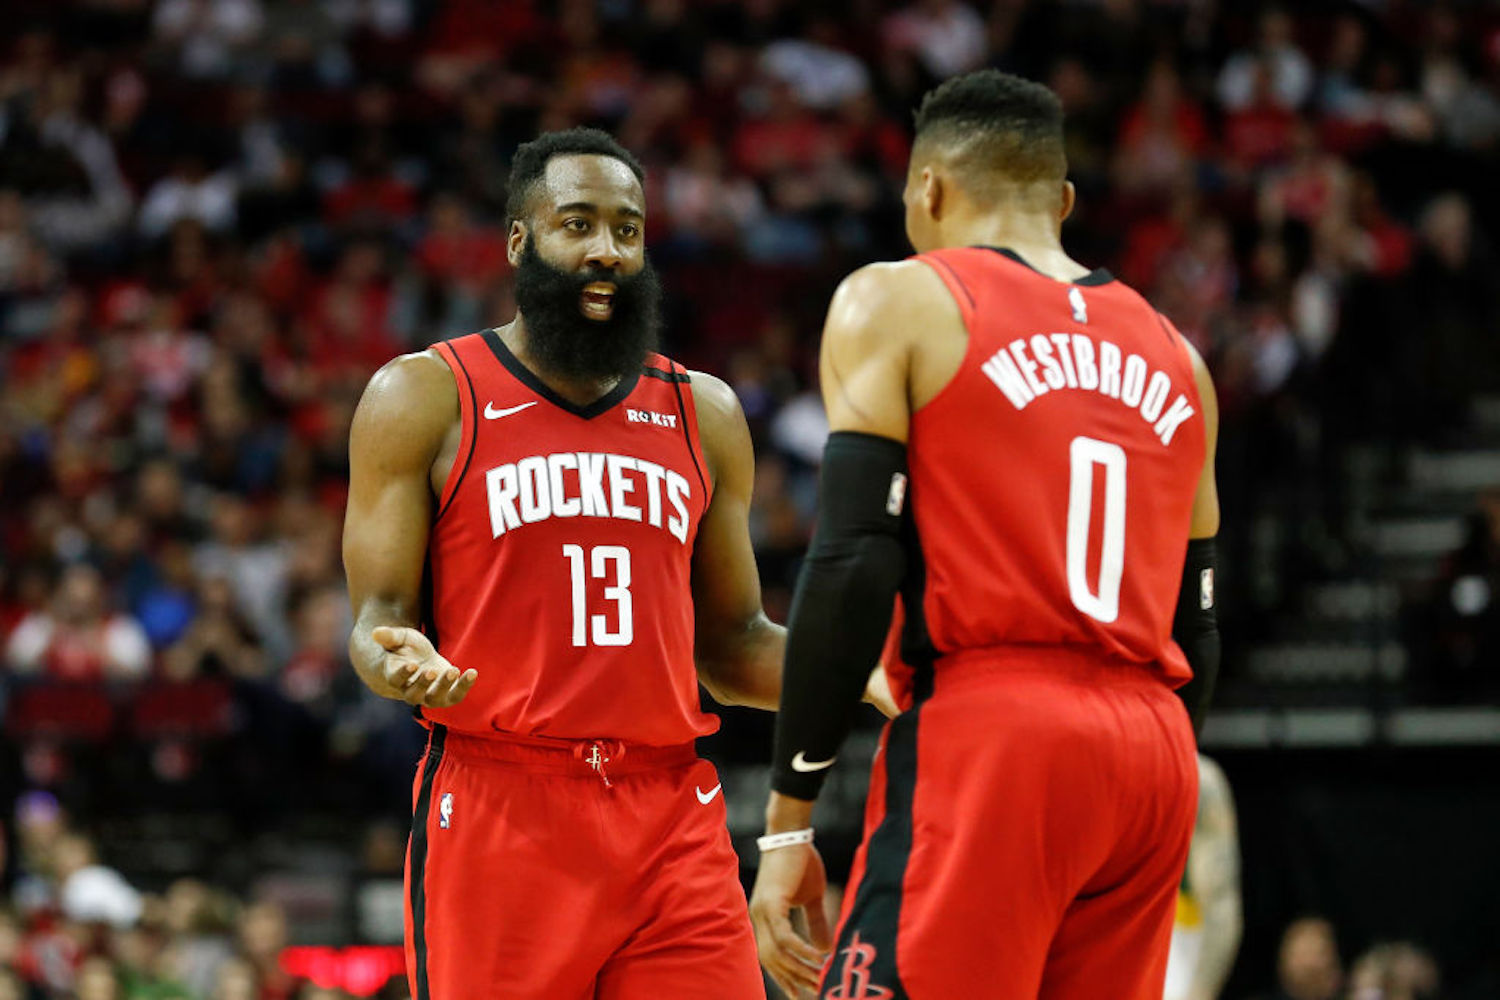 The Houston Rockets have been one of the top contenders in the Western Conference for years, but they could be falling apart at the seams.